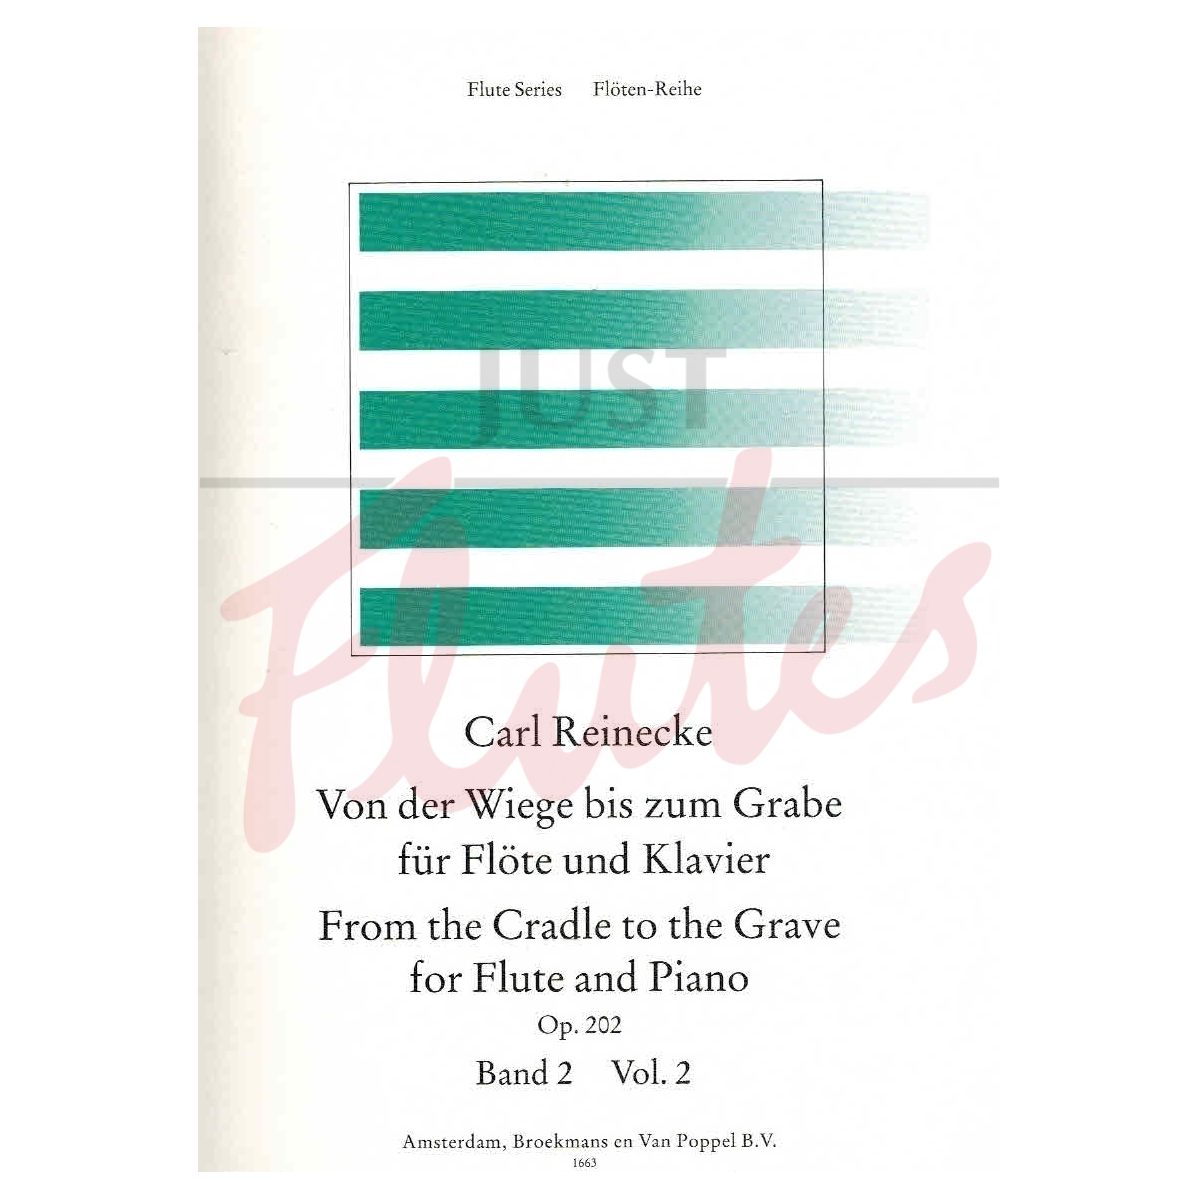 From the Cradle to the Grave for Flute and Piano, Volume 2